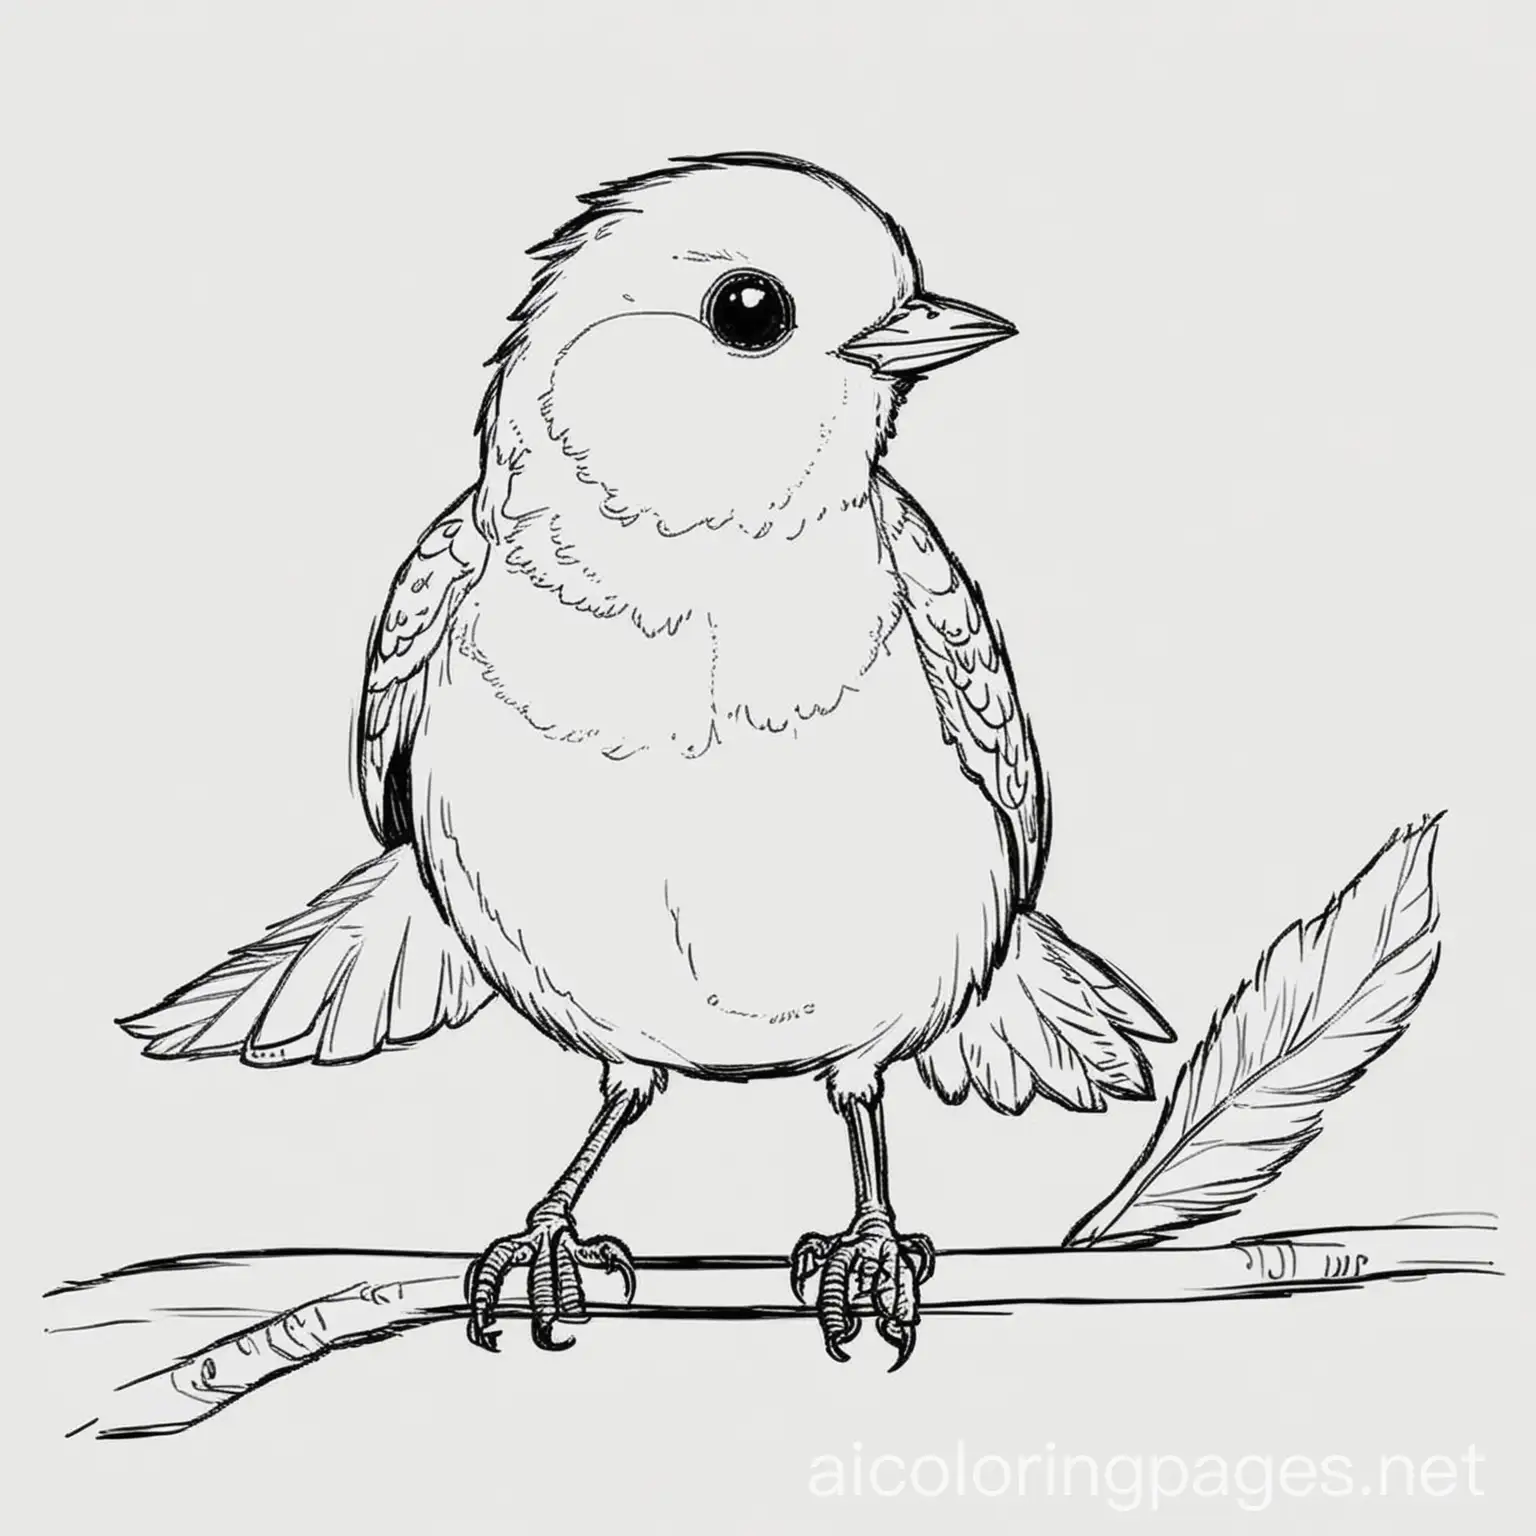 young bird, Coloring Page, black and white, line art, white background, Simplicity, Ample White Space. The background of the coloring page is plain white to make it easy for young children to color within the lines. The outlines of all the subjects are easy to distinguish, making it simple for kids to color without too much difficulty, Coloring Page, black and white, line art, white background, Simplicity, Ample White Space. The background of the coloring page is plain white to make it easy for young children to color within the lines. The outlines of all the subjects are easy to distinguish, making it simple for kids to color without too much difficulty